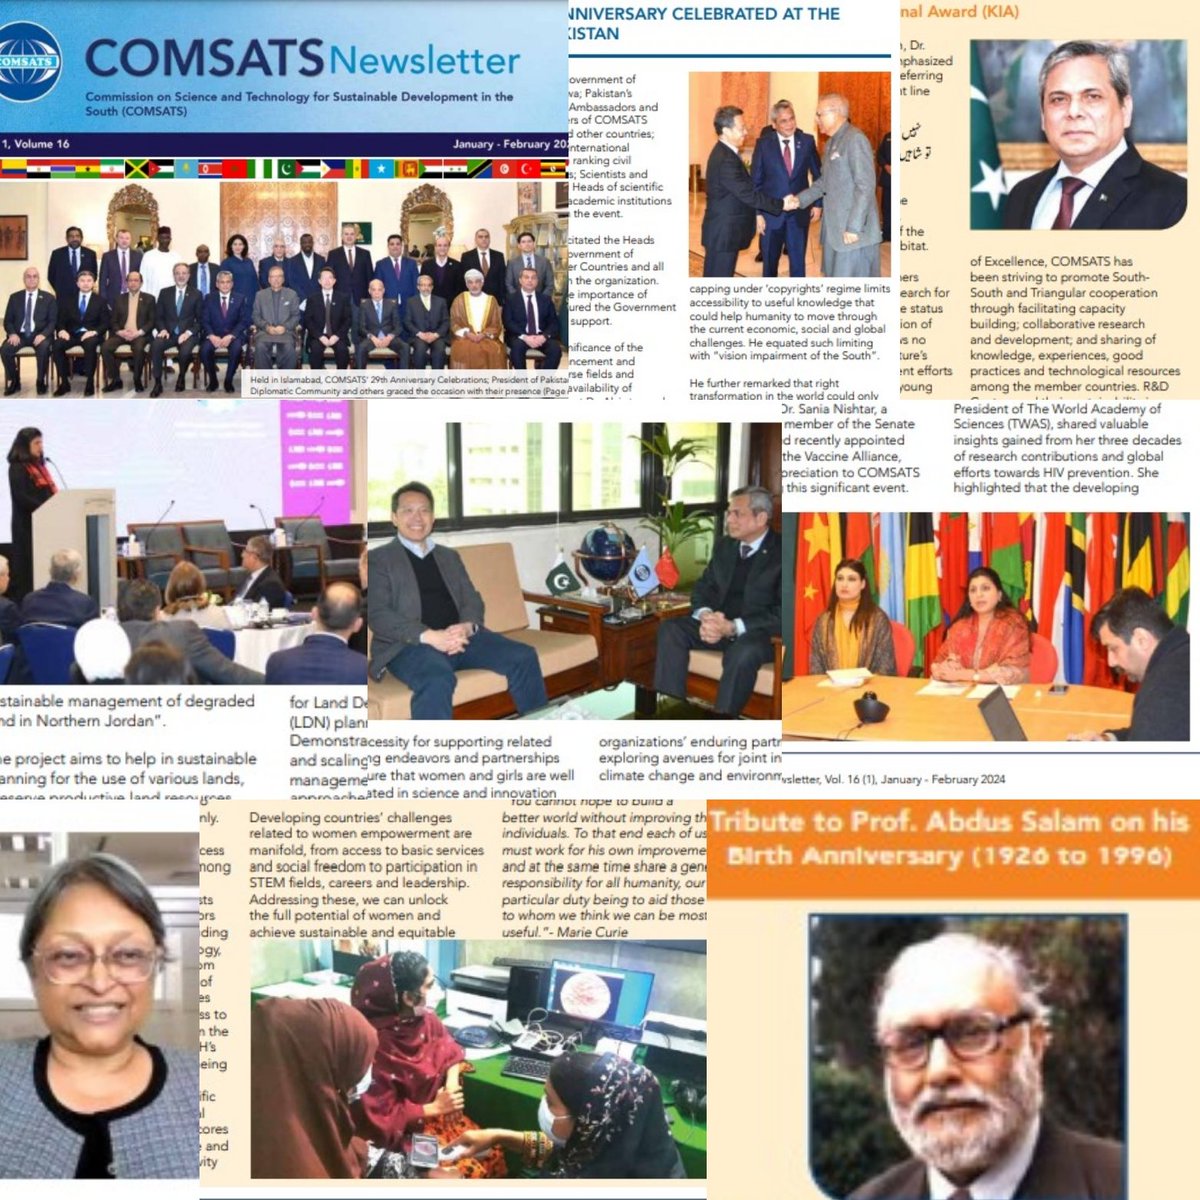 COMSATS #Newsletter Jan-Feb 24 out now:👇 comsats.org/wp-content/upl… Includes news on: 🗞️ COMSATS 29th Anniversary 🎉 Celebrations 🗞️ IT Bootcamp in #Azerbaijan🇦🇿 🗞️ KIA laureates award sponsorship 🗞️ Women & Girls 👩‍🔬 in Science 🔭 Day Event 🗞️ Centres' latest research 🔬& more